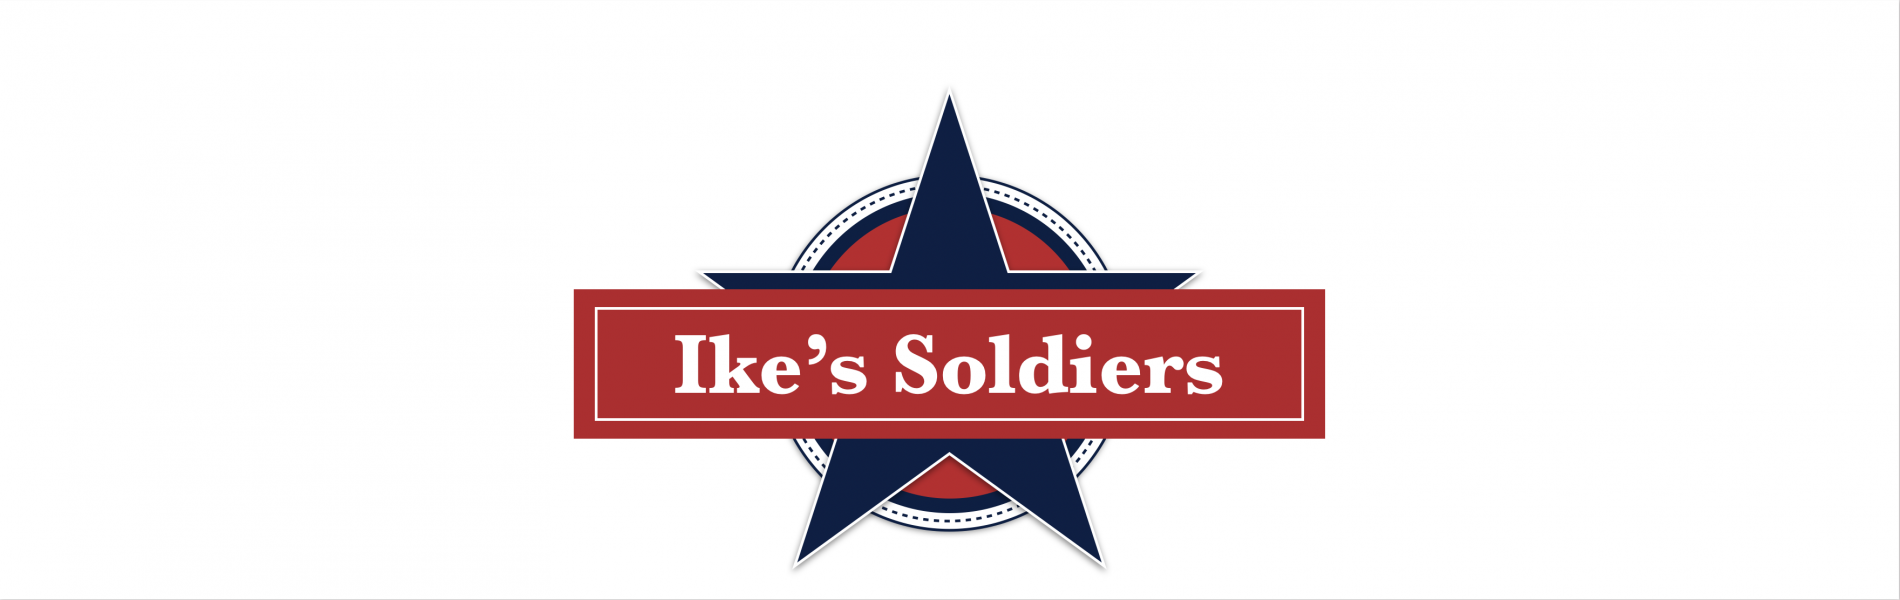 Ike's Soldiers banner image